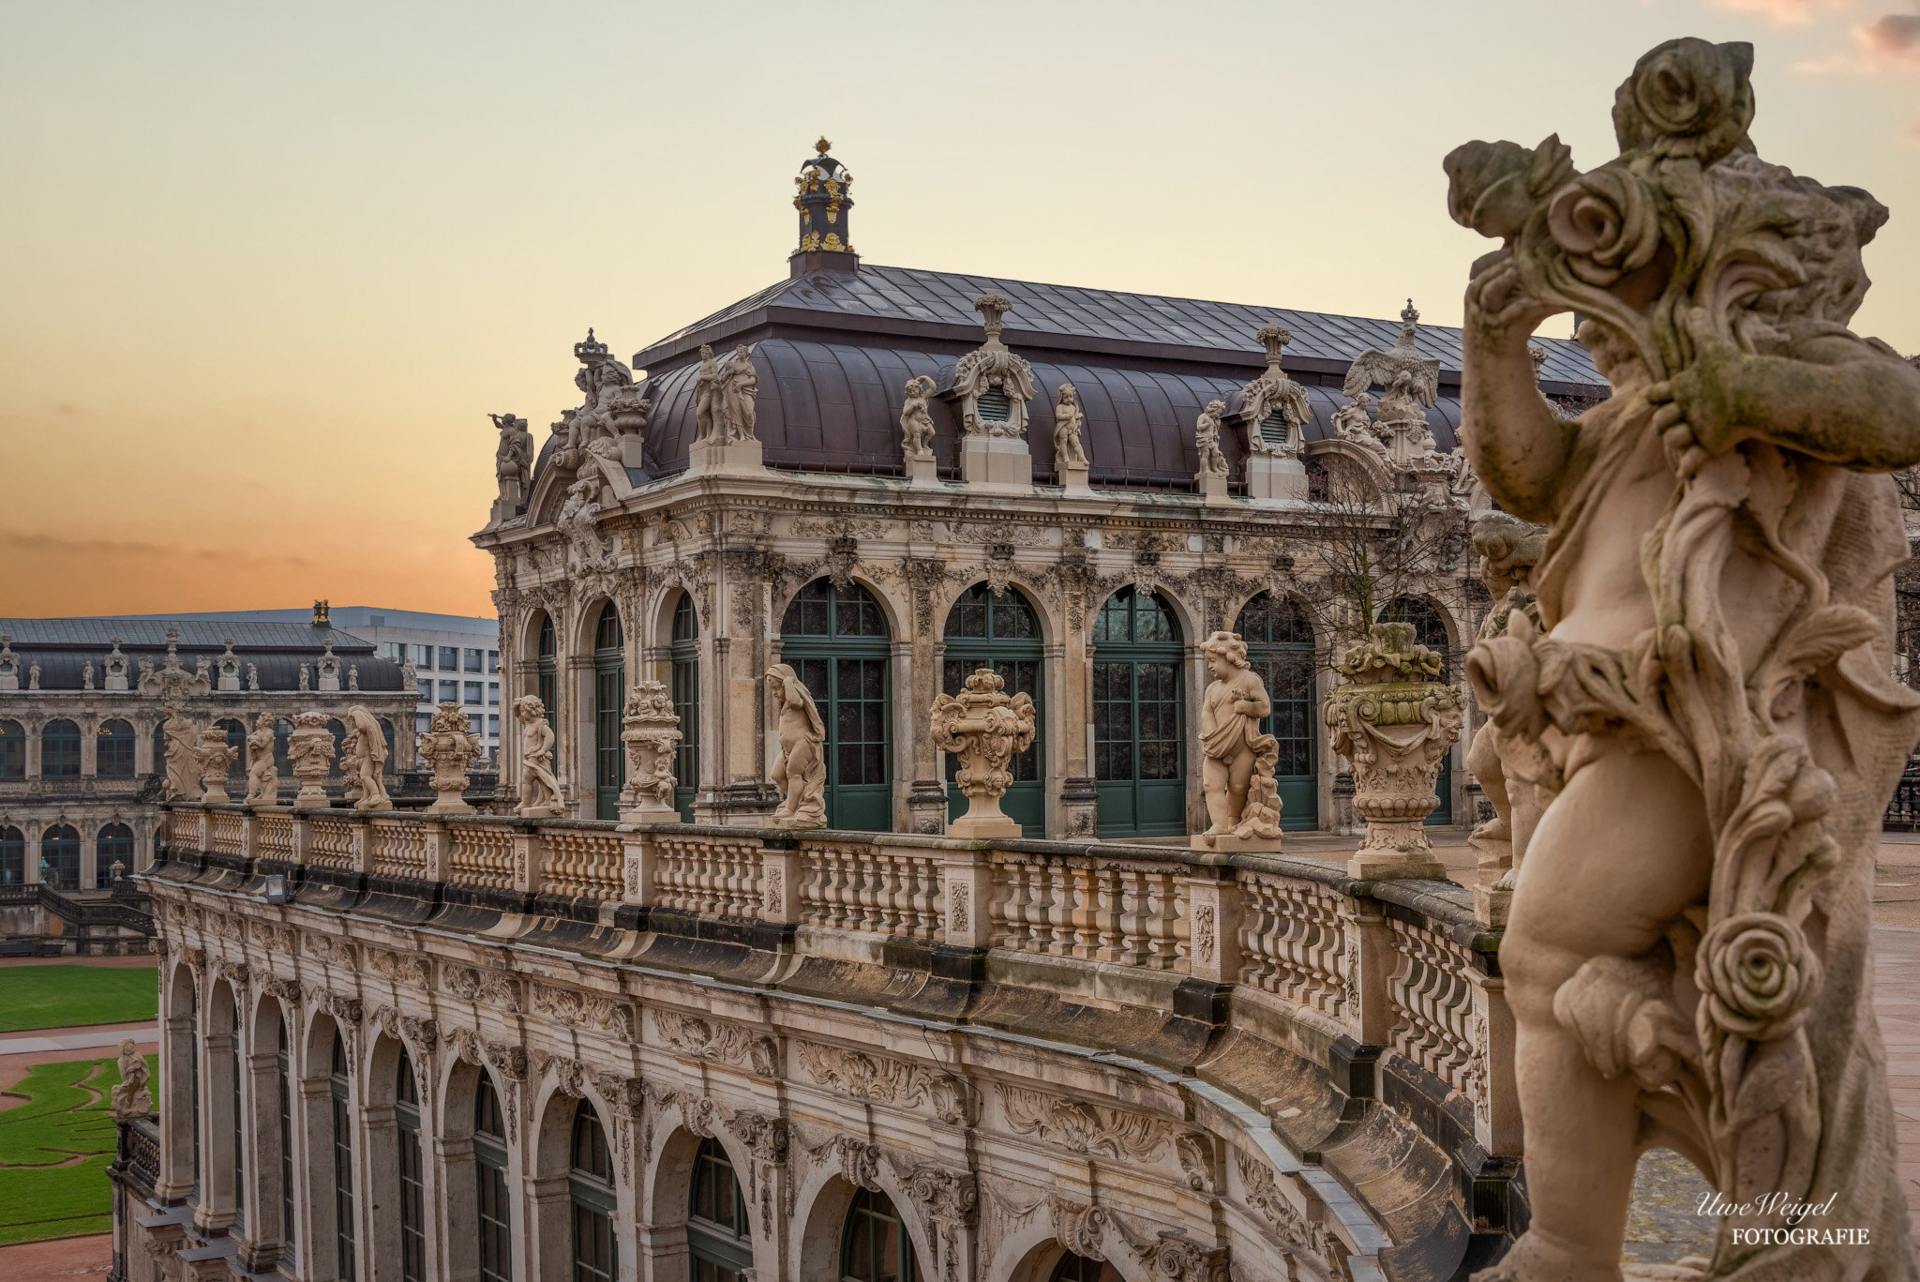 man made, palace, architecture, dresden, germany, sculpture, palaces